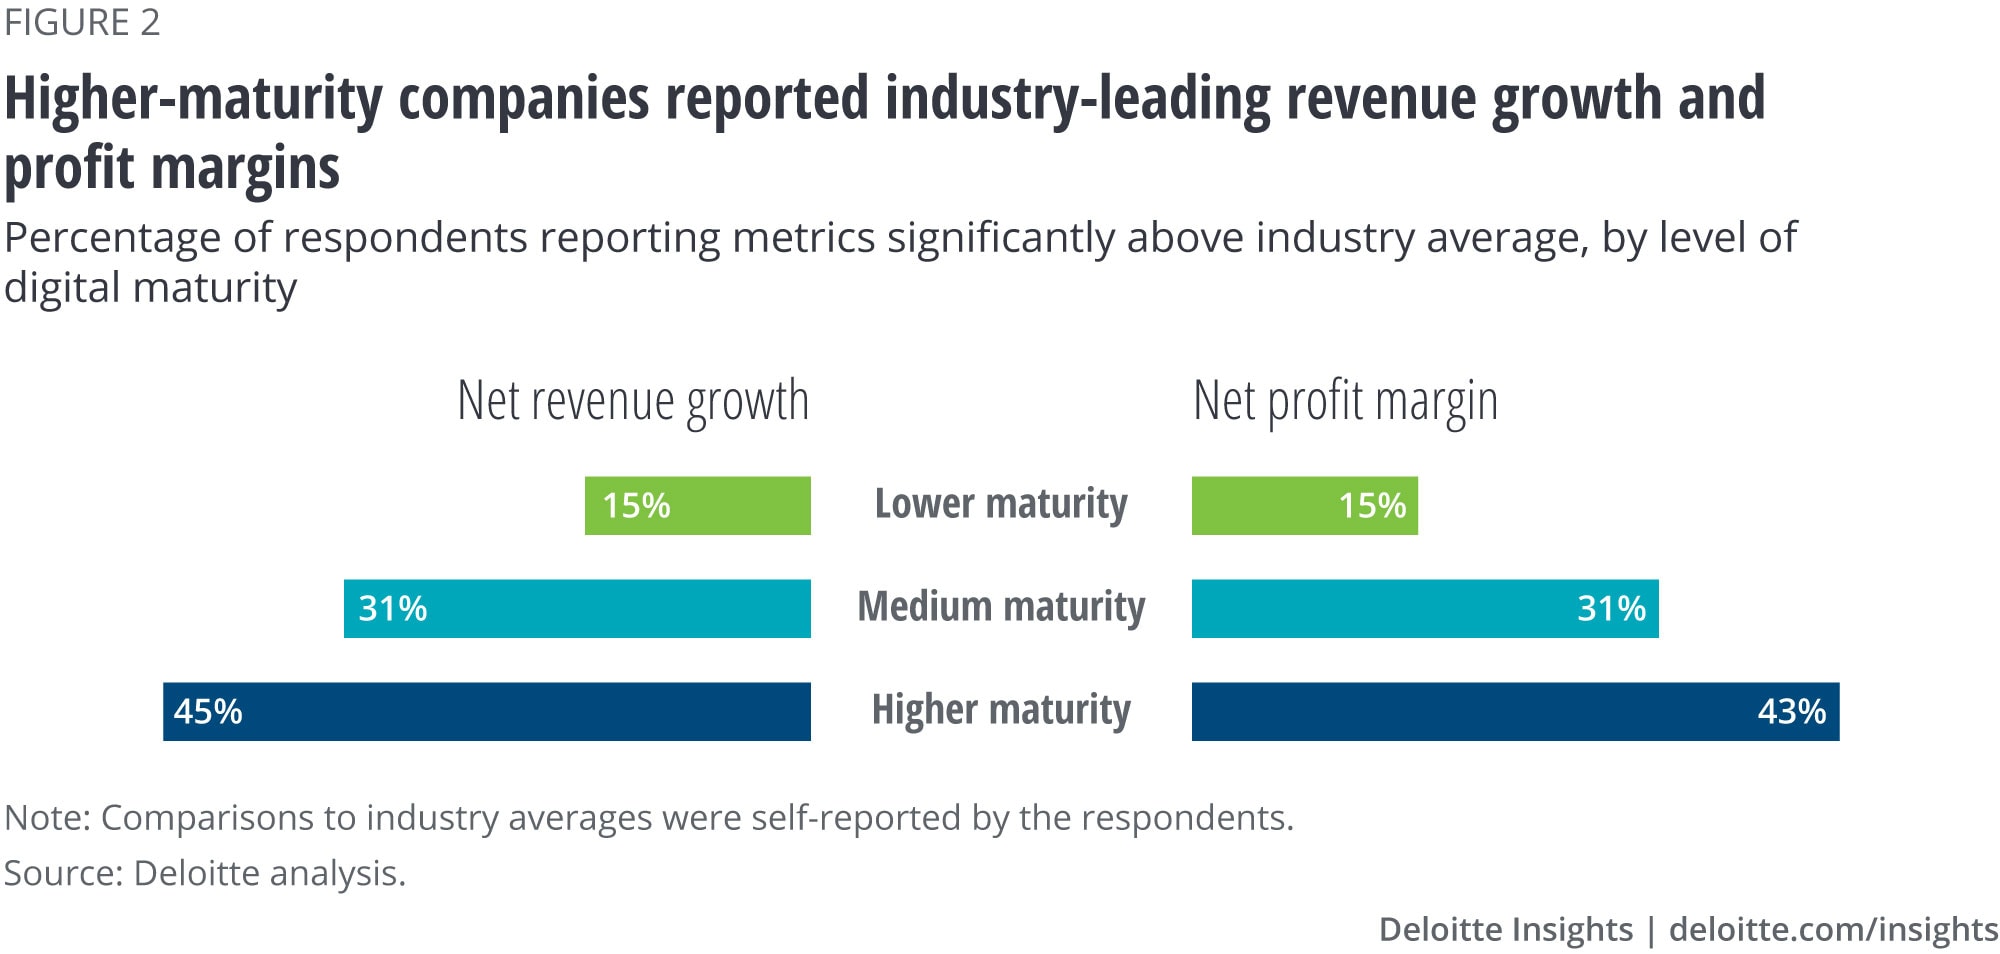 Higher-maturity companies were more likely to report industry-leading net revenue growth and net profit margins